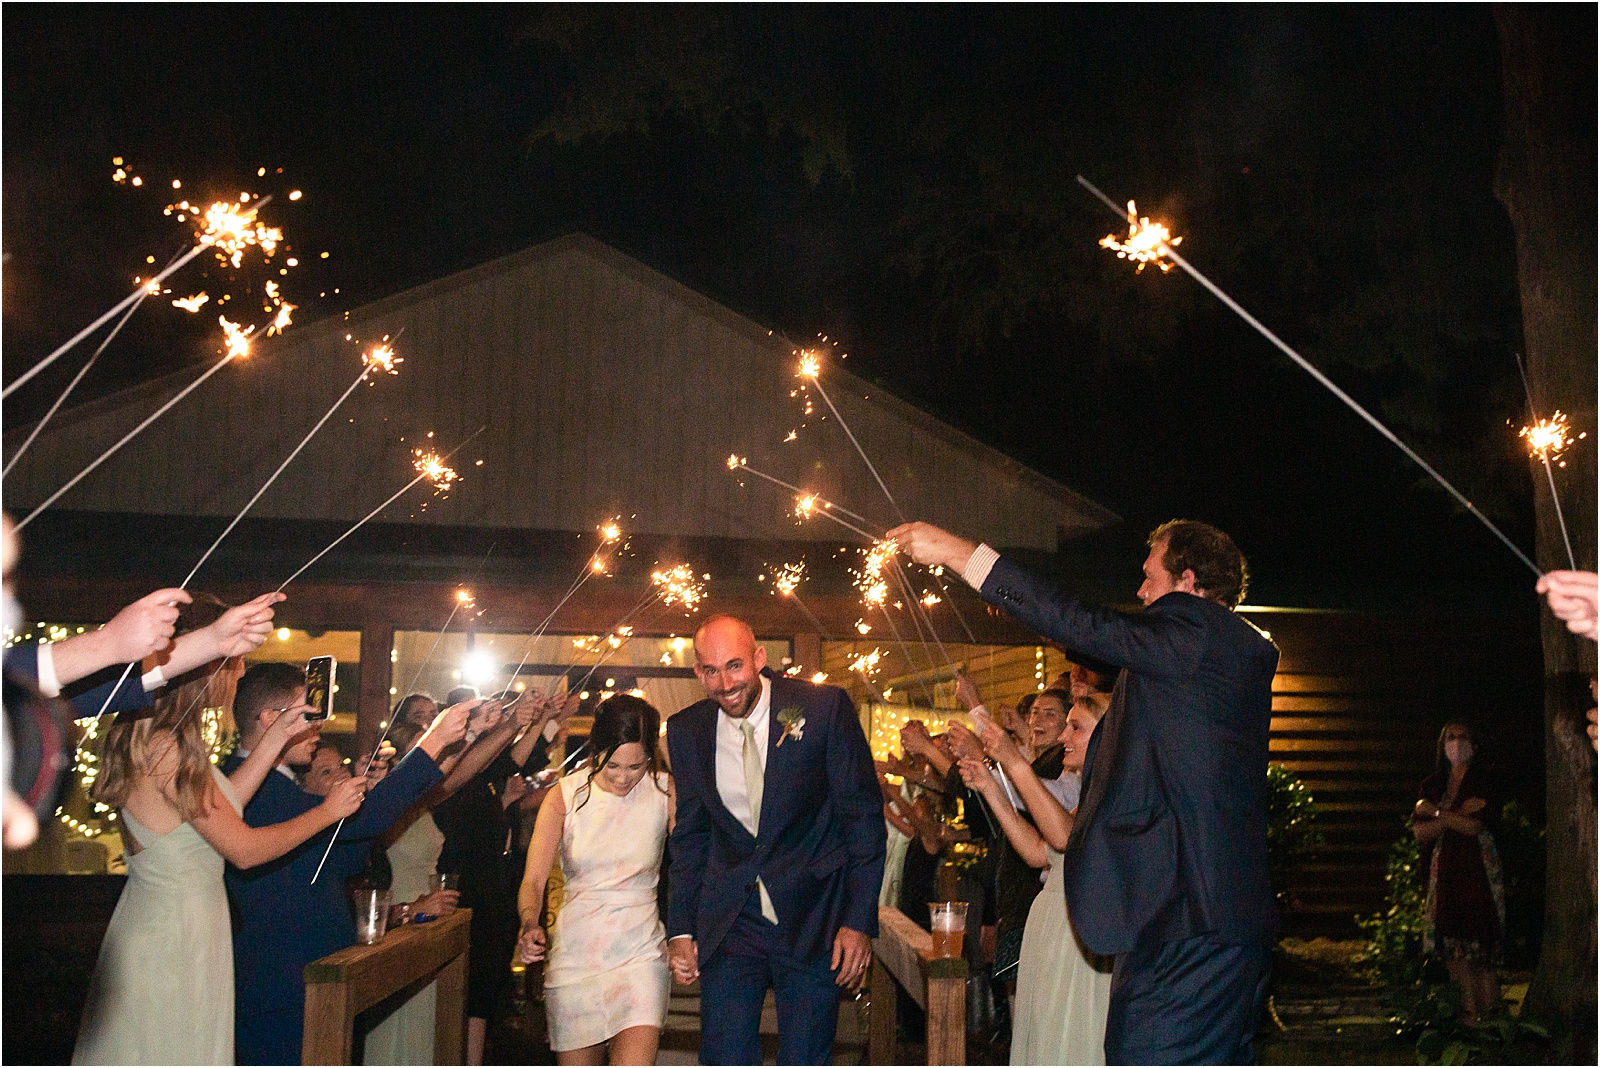 Wedding guests holding up sparklers as bride and groom walk through